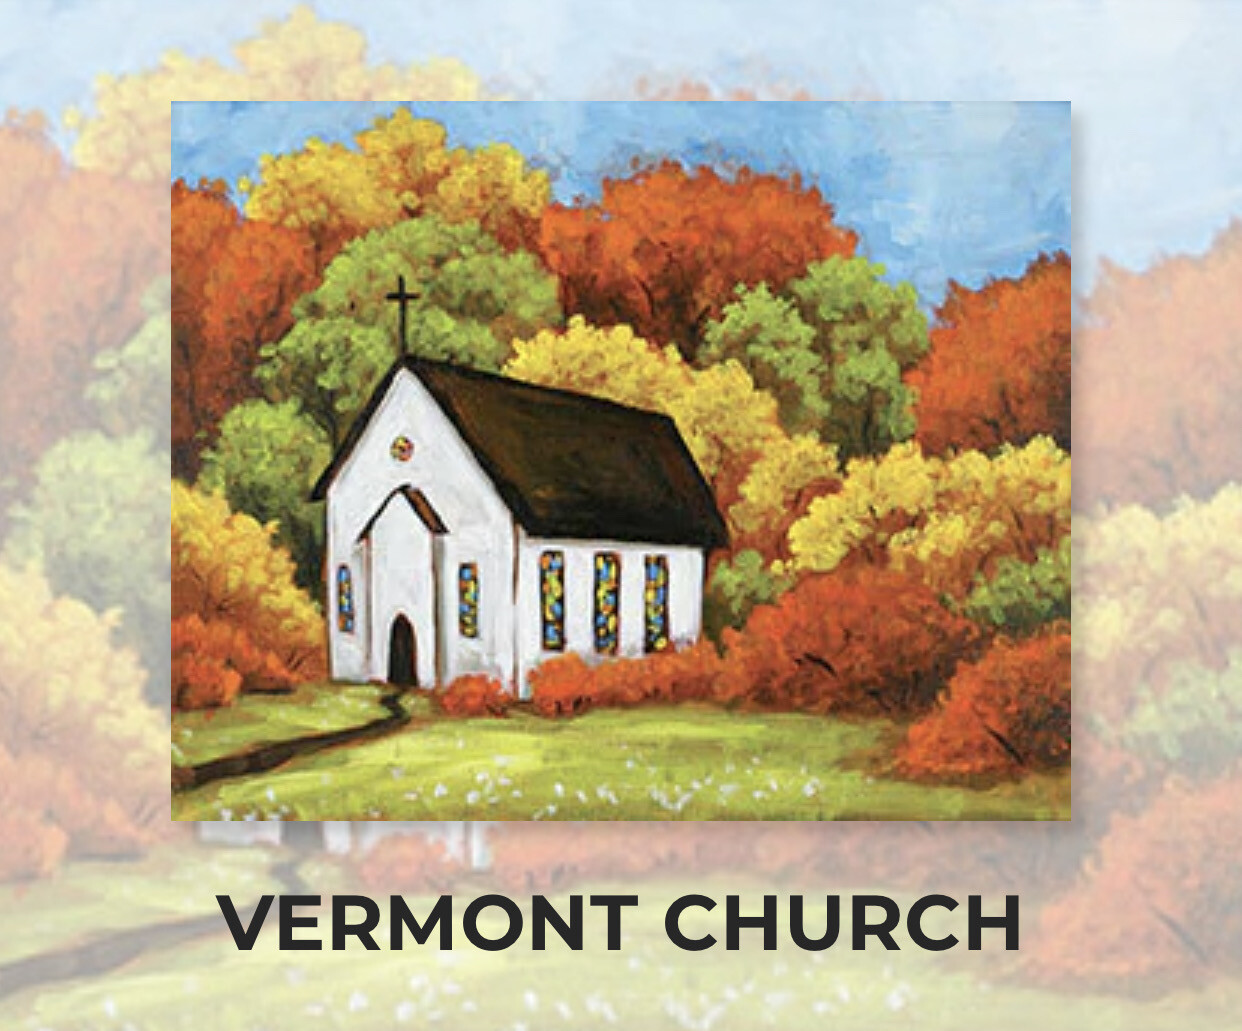 Vermont Church ADULT Acrylic Paint On Canvas DIY Art Kit - 3 Week Special Order